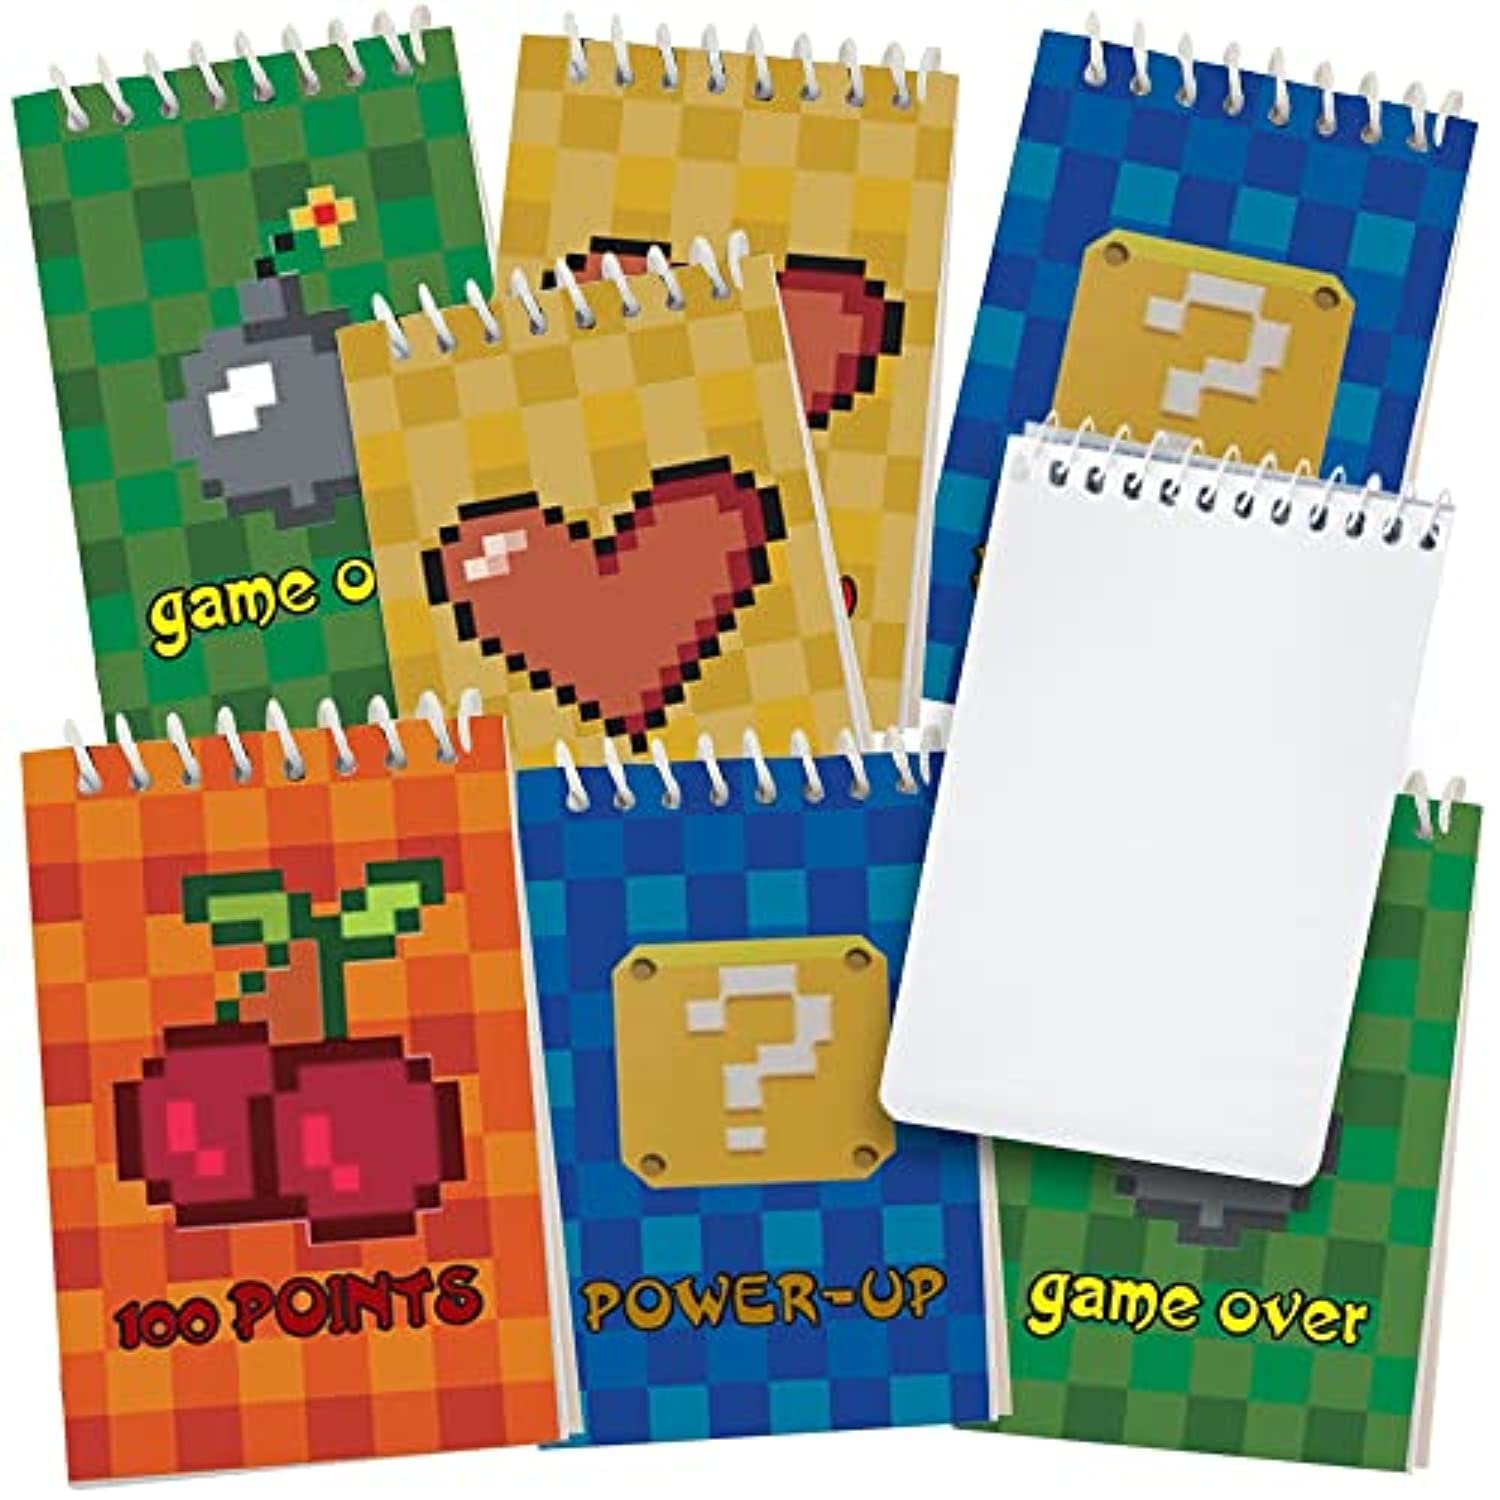 Mini Power Up Notebooks, Pack of 16, Video Game & Pixel Themed Spiral Notepads, Cute Stationery Supplies for School and Office, Fun Birthday Party Favors, Goodie Bag Fillers for Kids